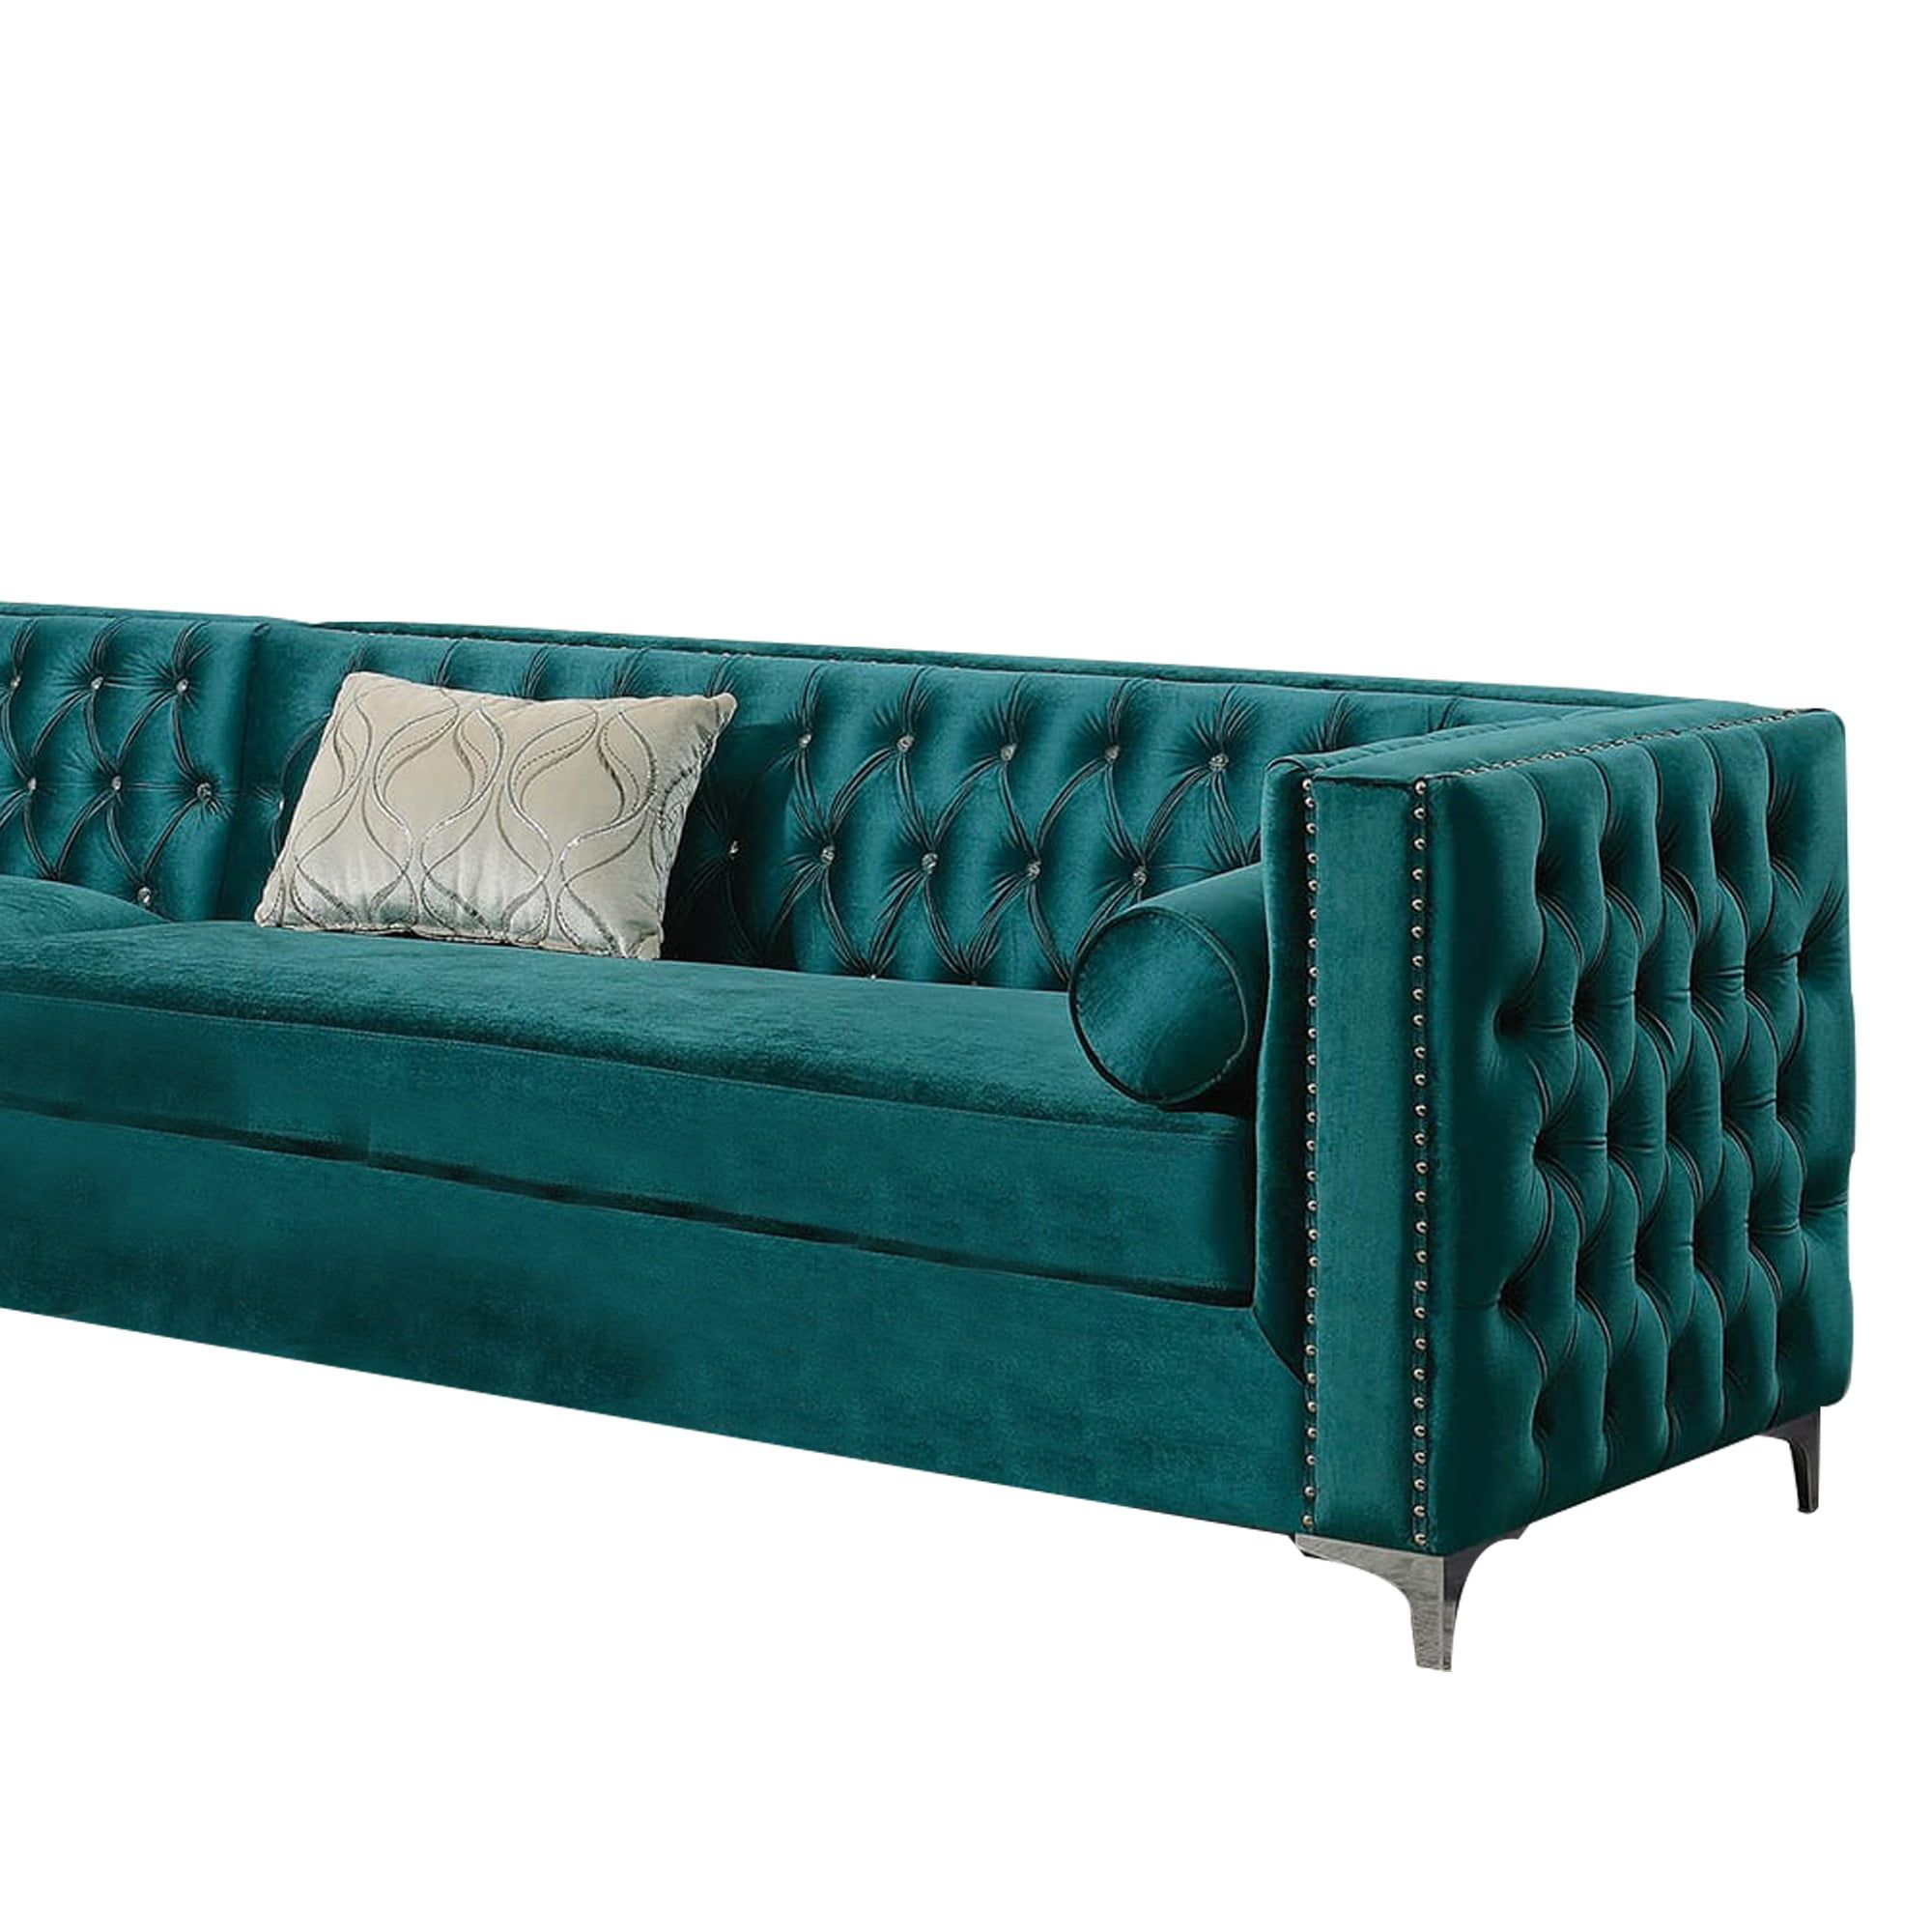 Velvet Upholstered 2 Piece Sectional Sofa With Tufted Details, Teal Pertaining To Tufted Upholstered Sofas (View 17 of 20)